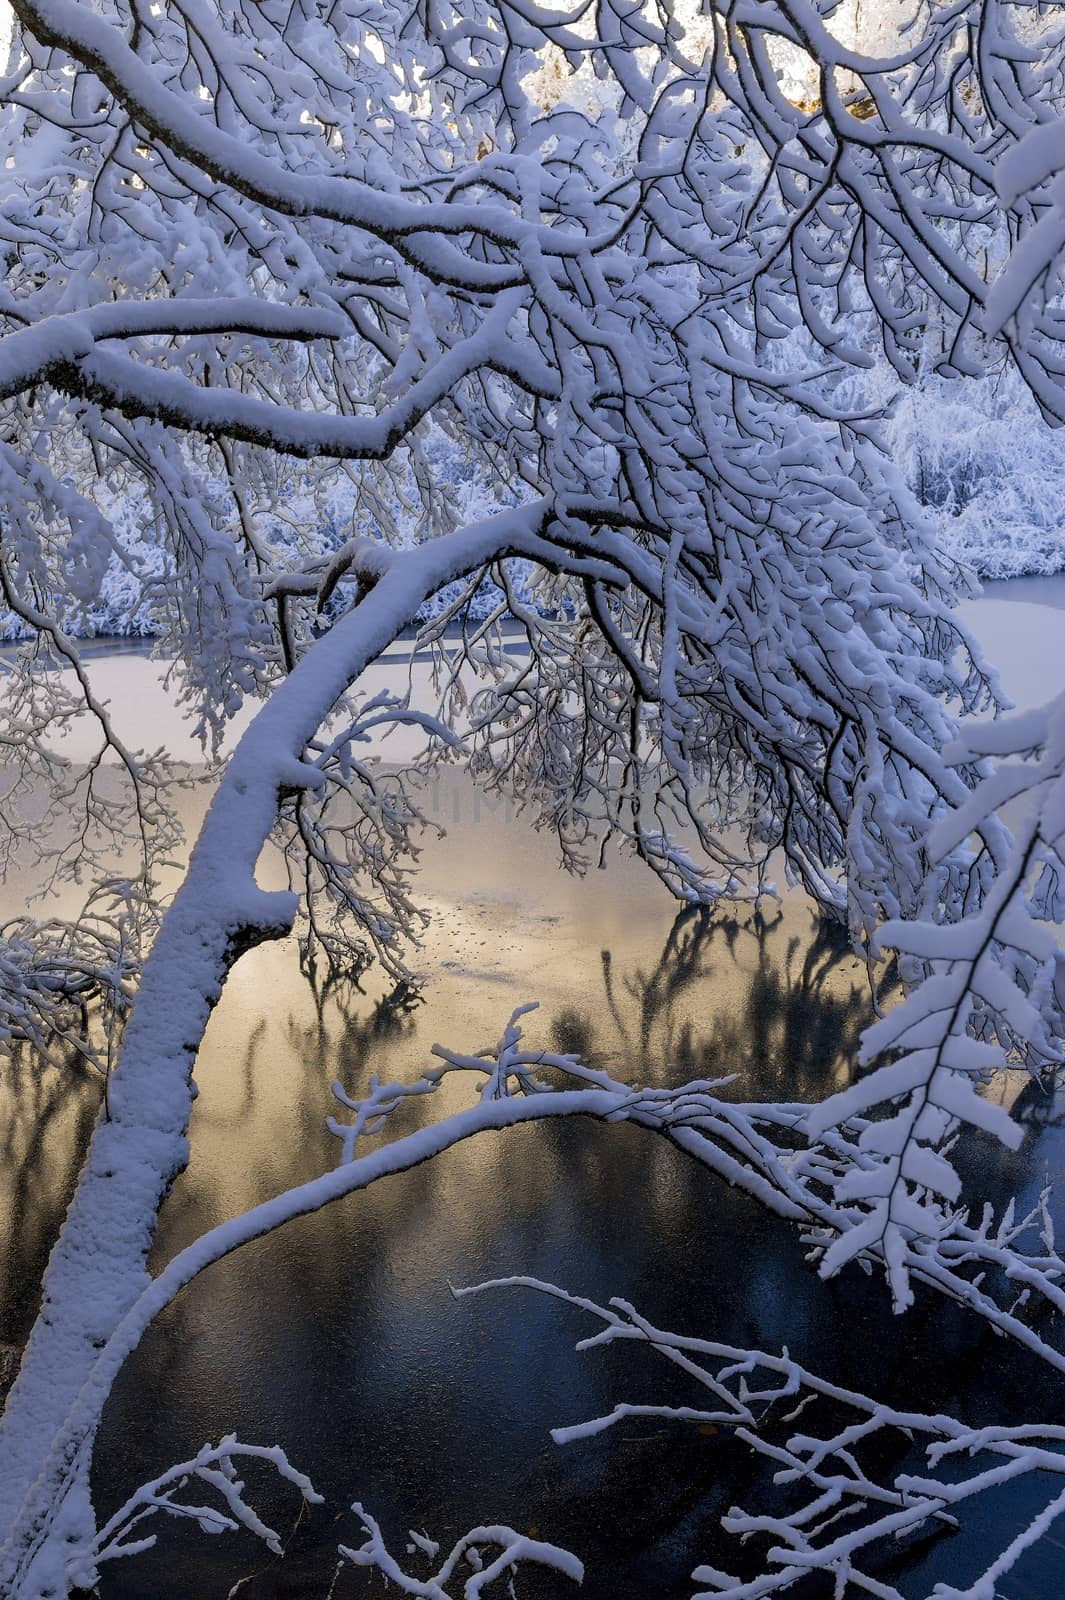 Snow-covered branches over a frozen lake in the Plitvice Lakes National Park.